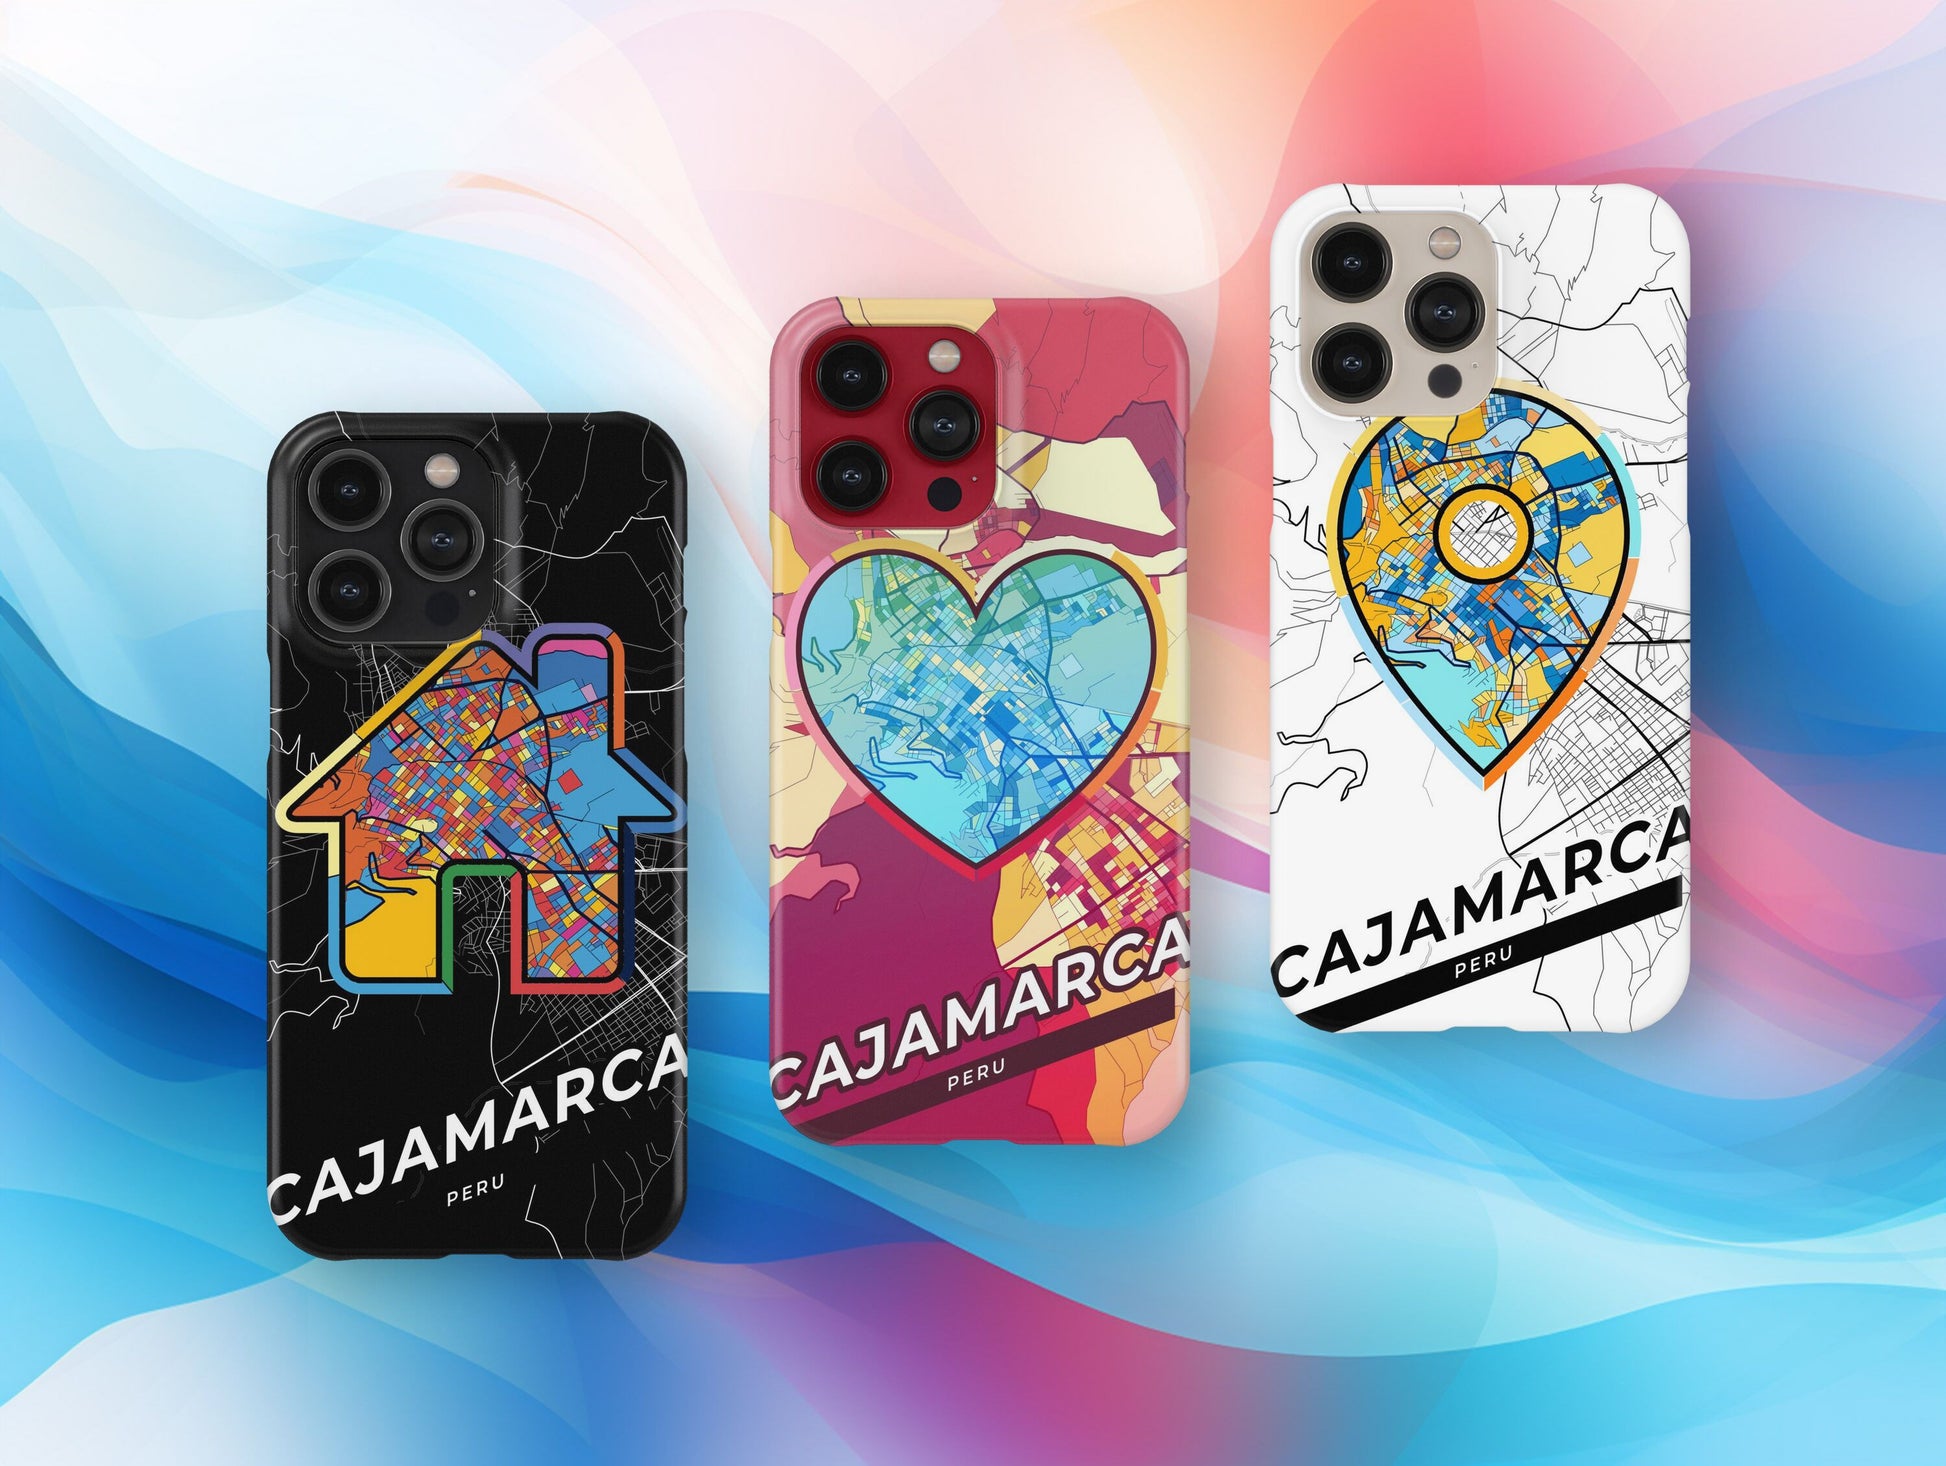 Cajamarca Peru slim phone case with colorful icon. Birthday, wedding or housewarming gift. Couple match cases.